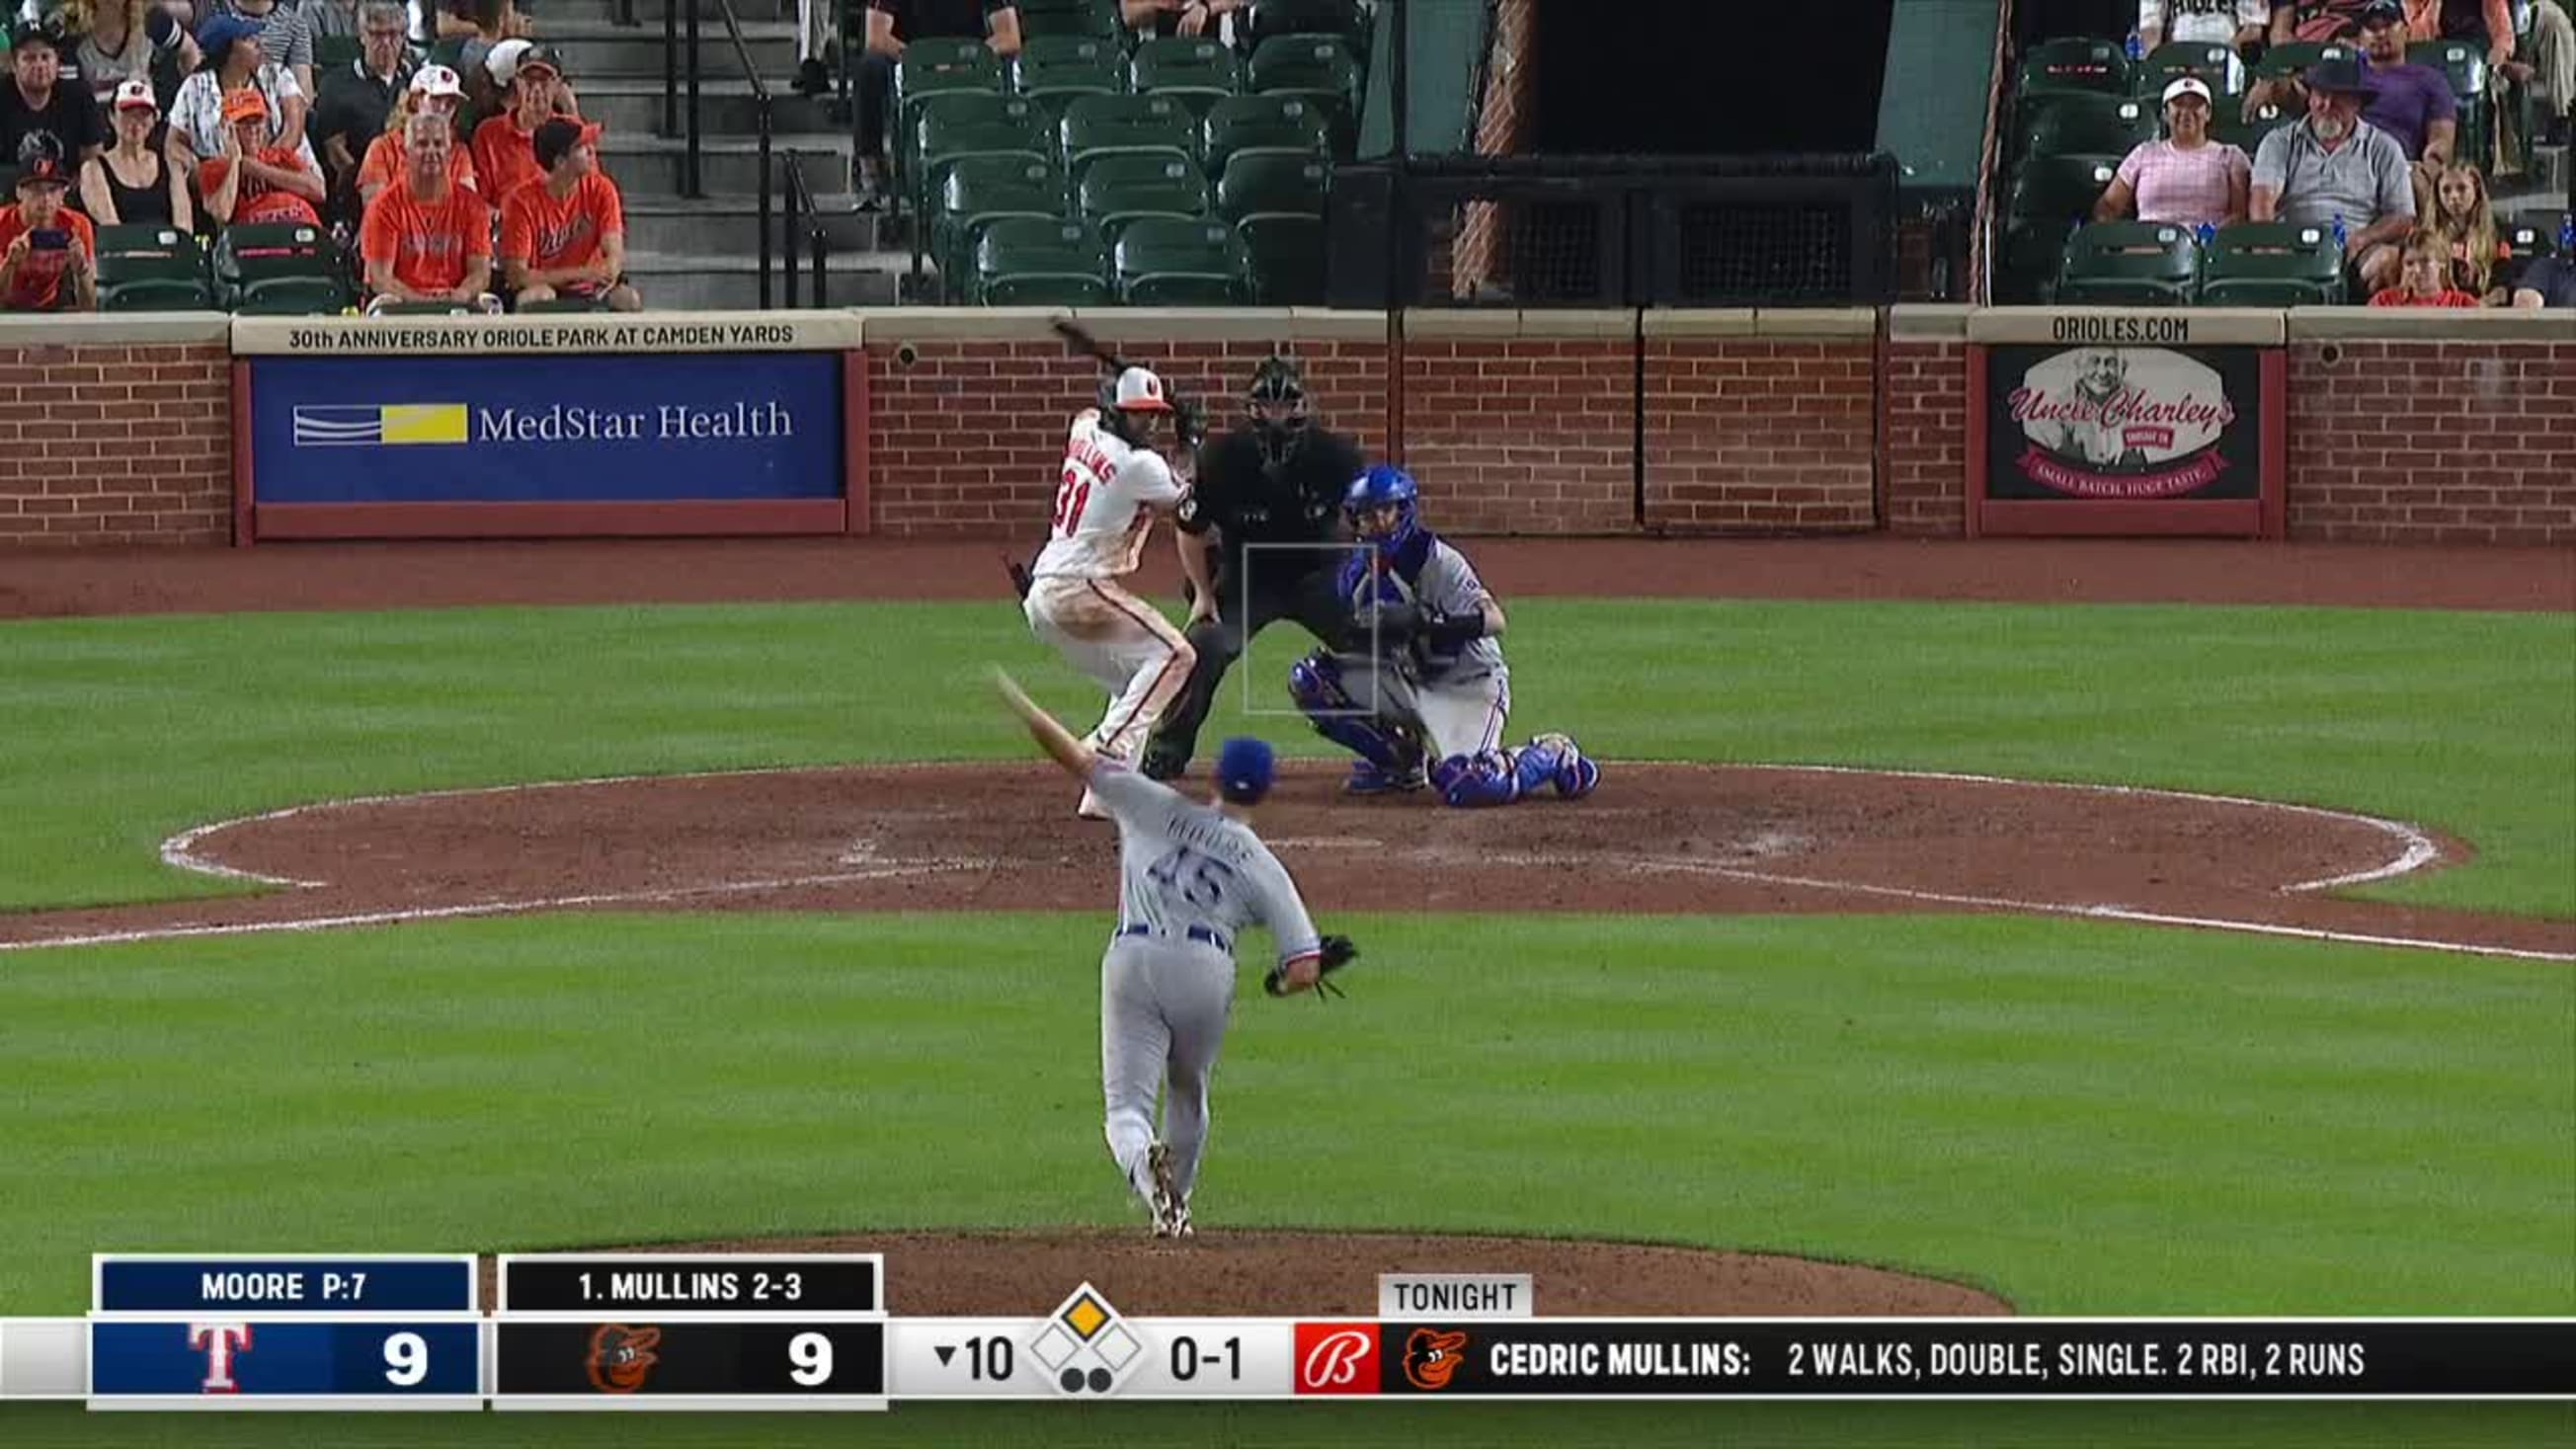 Cedric Mullins diving catch, Cedric Mullins waited approximately 30  seconds to make a web gem, By MASN Orioles